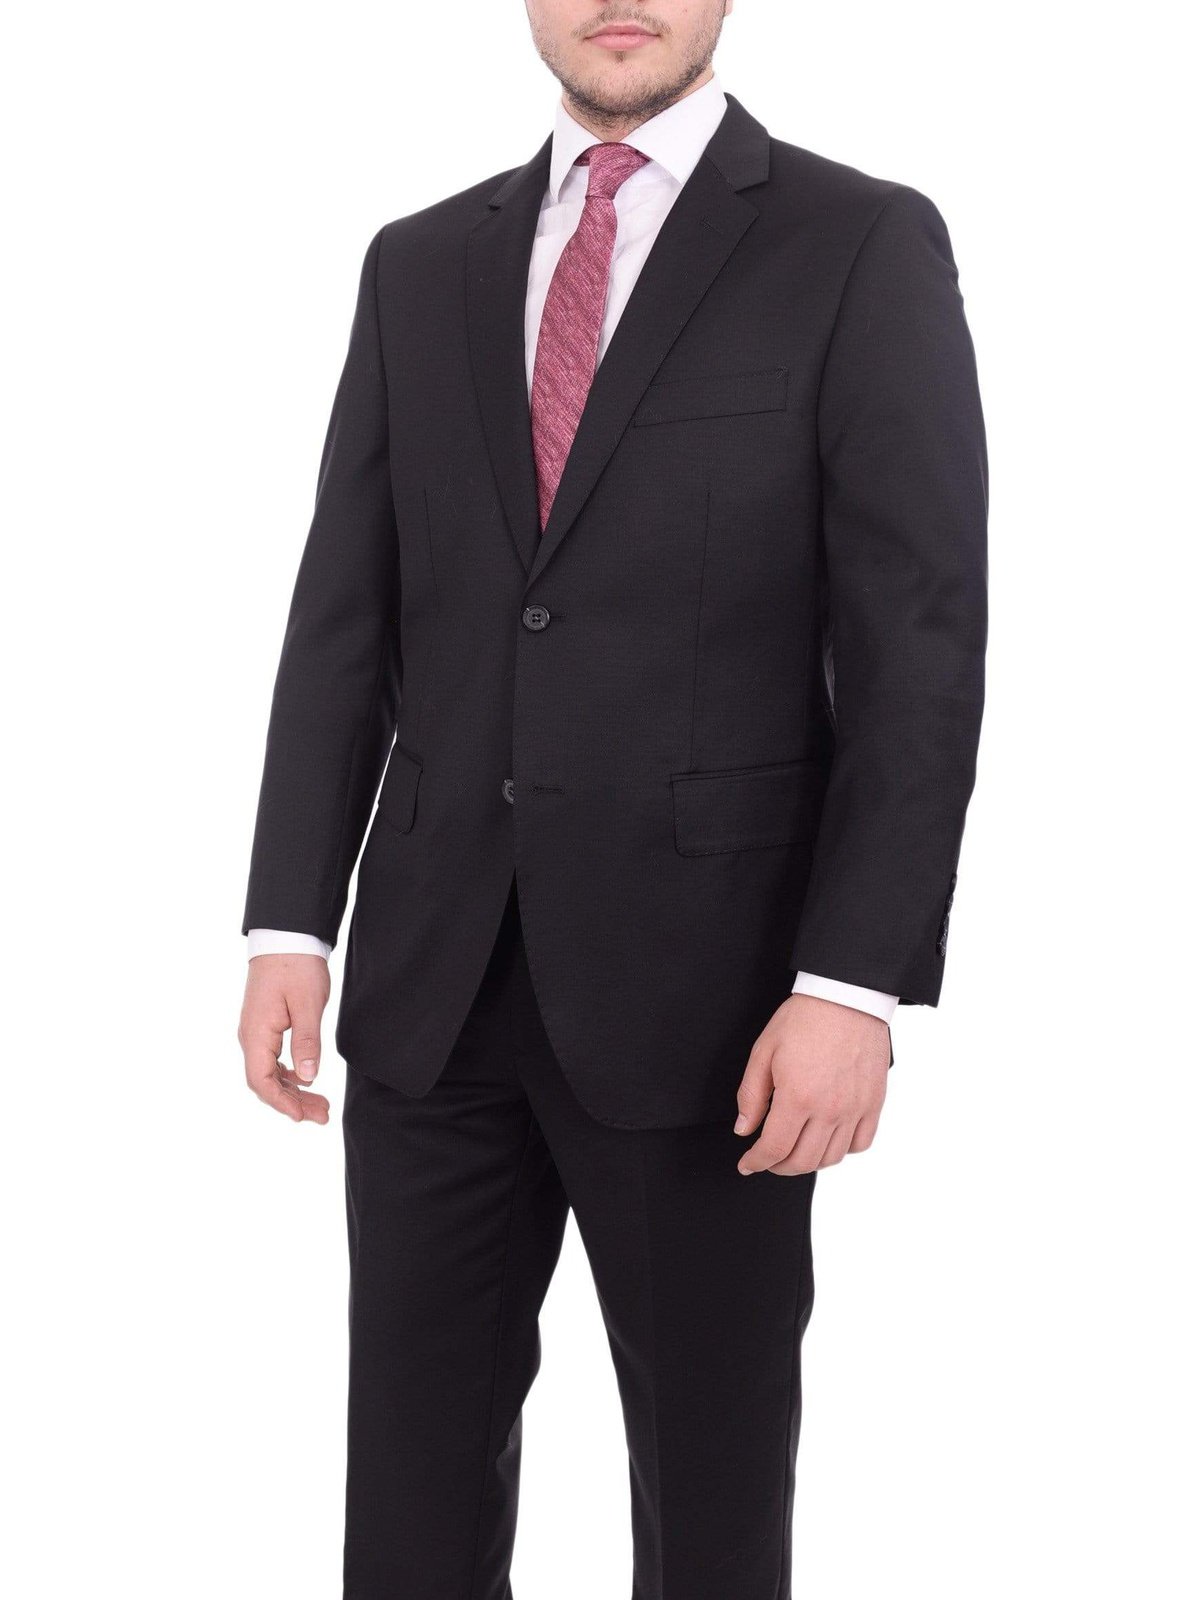 Giorgio Cosani TWO PIECE SUITS 40S Giorgio Cosani Regular Fit Solid Black Two Button Wool Suit